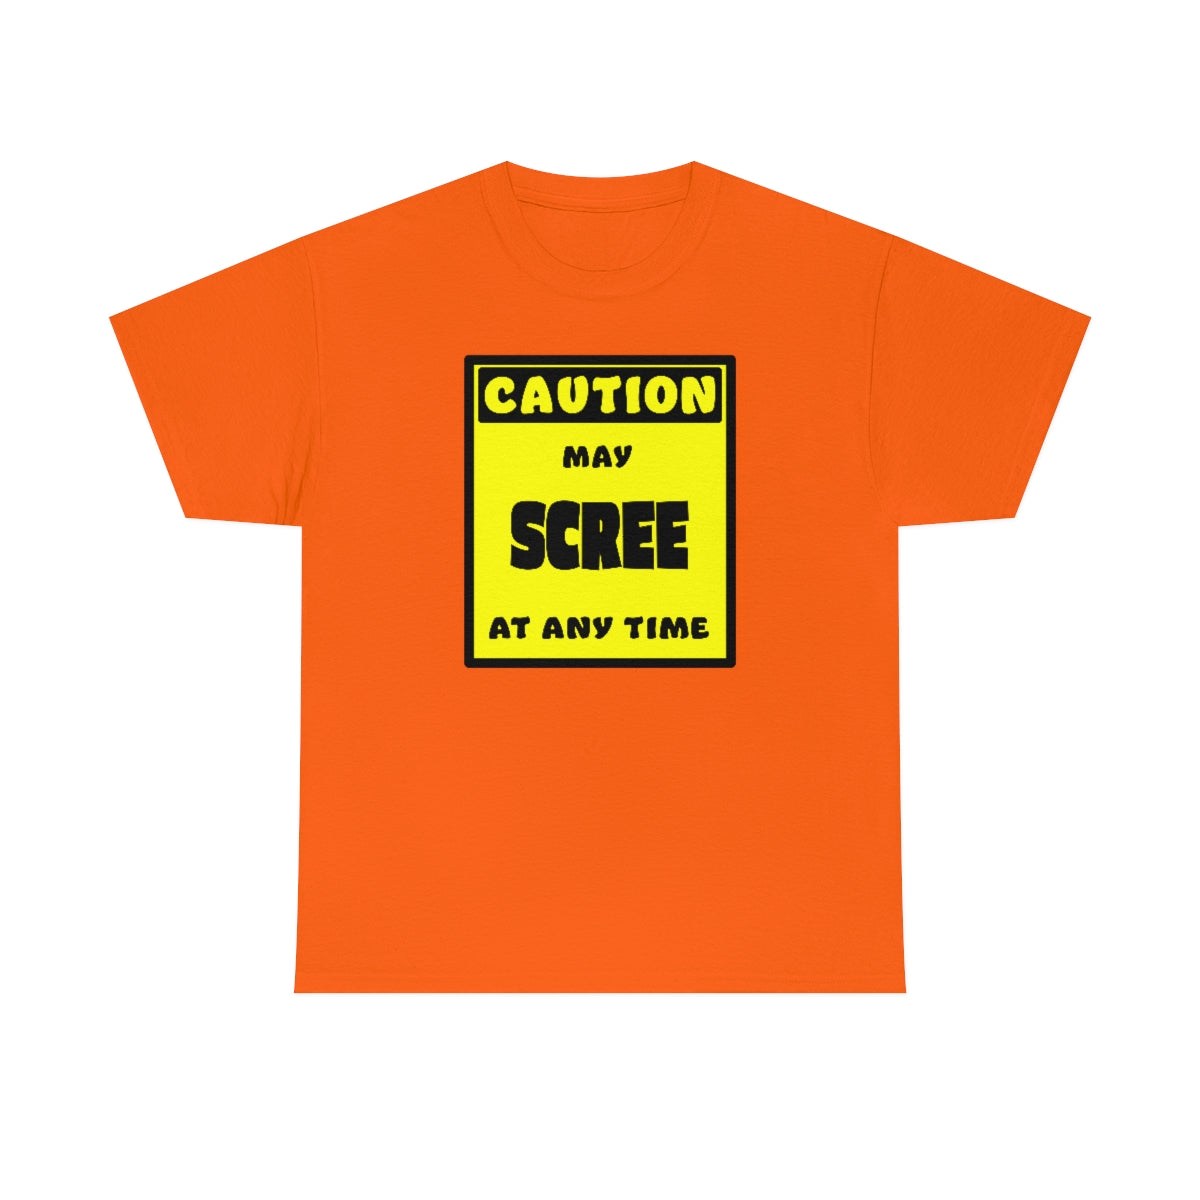 CAUTION! May SCREE at any time! - T-Shirt T-Shirt AFLT-Whootorca Orange S 